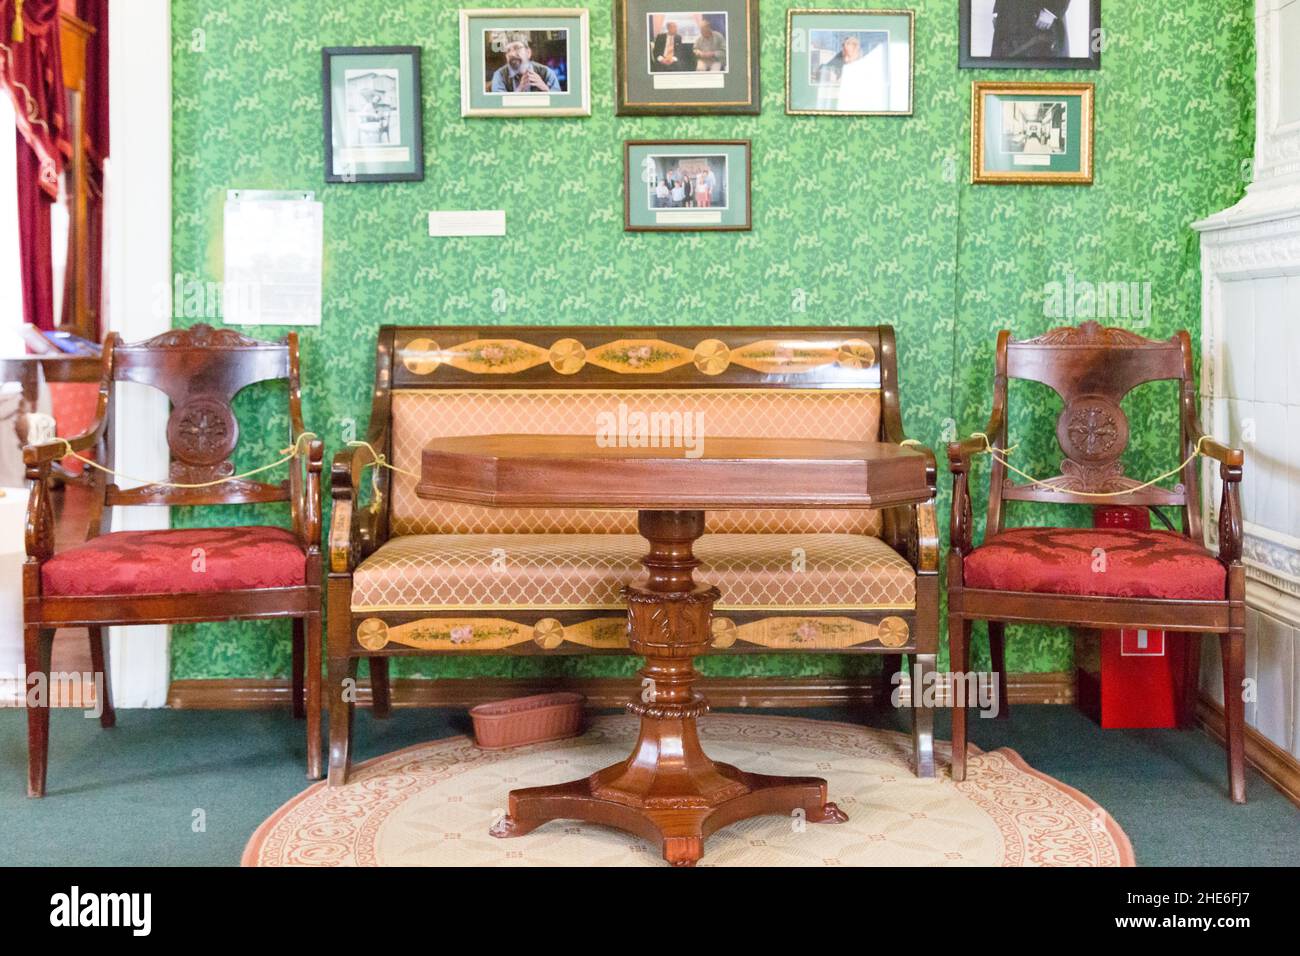 Irkutsk, Russia July 30, 2021 - House of the Decembrist Trubetskoy Sergei Petrovich. Furniture on the background of the wall with portraits Stock Photo